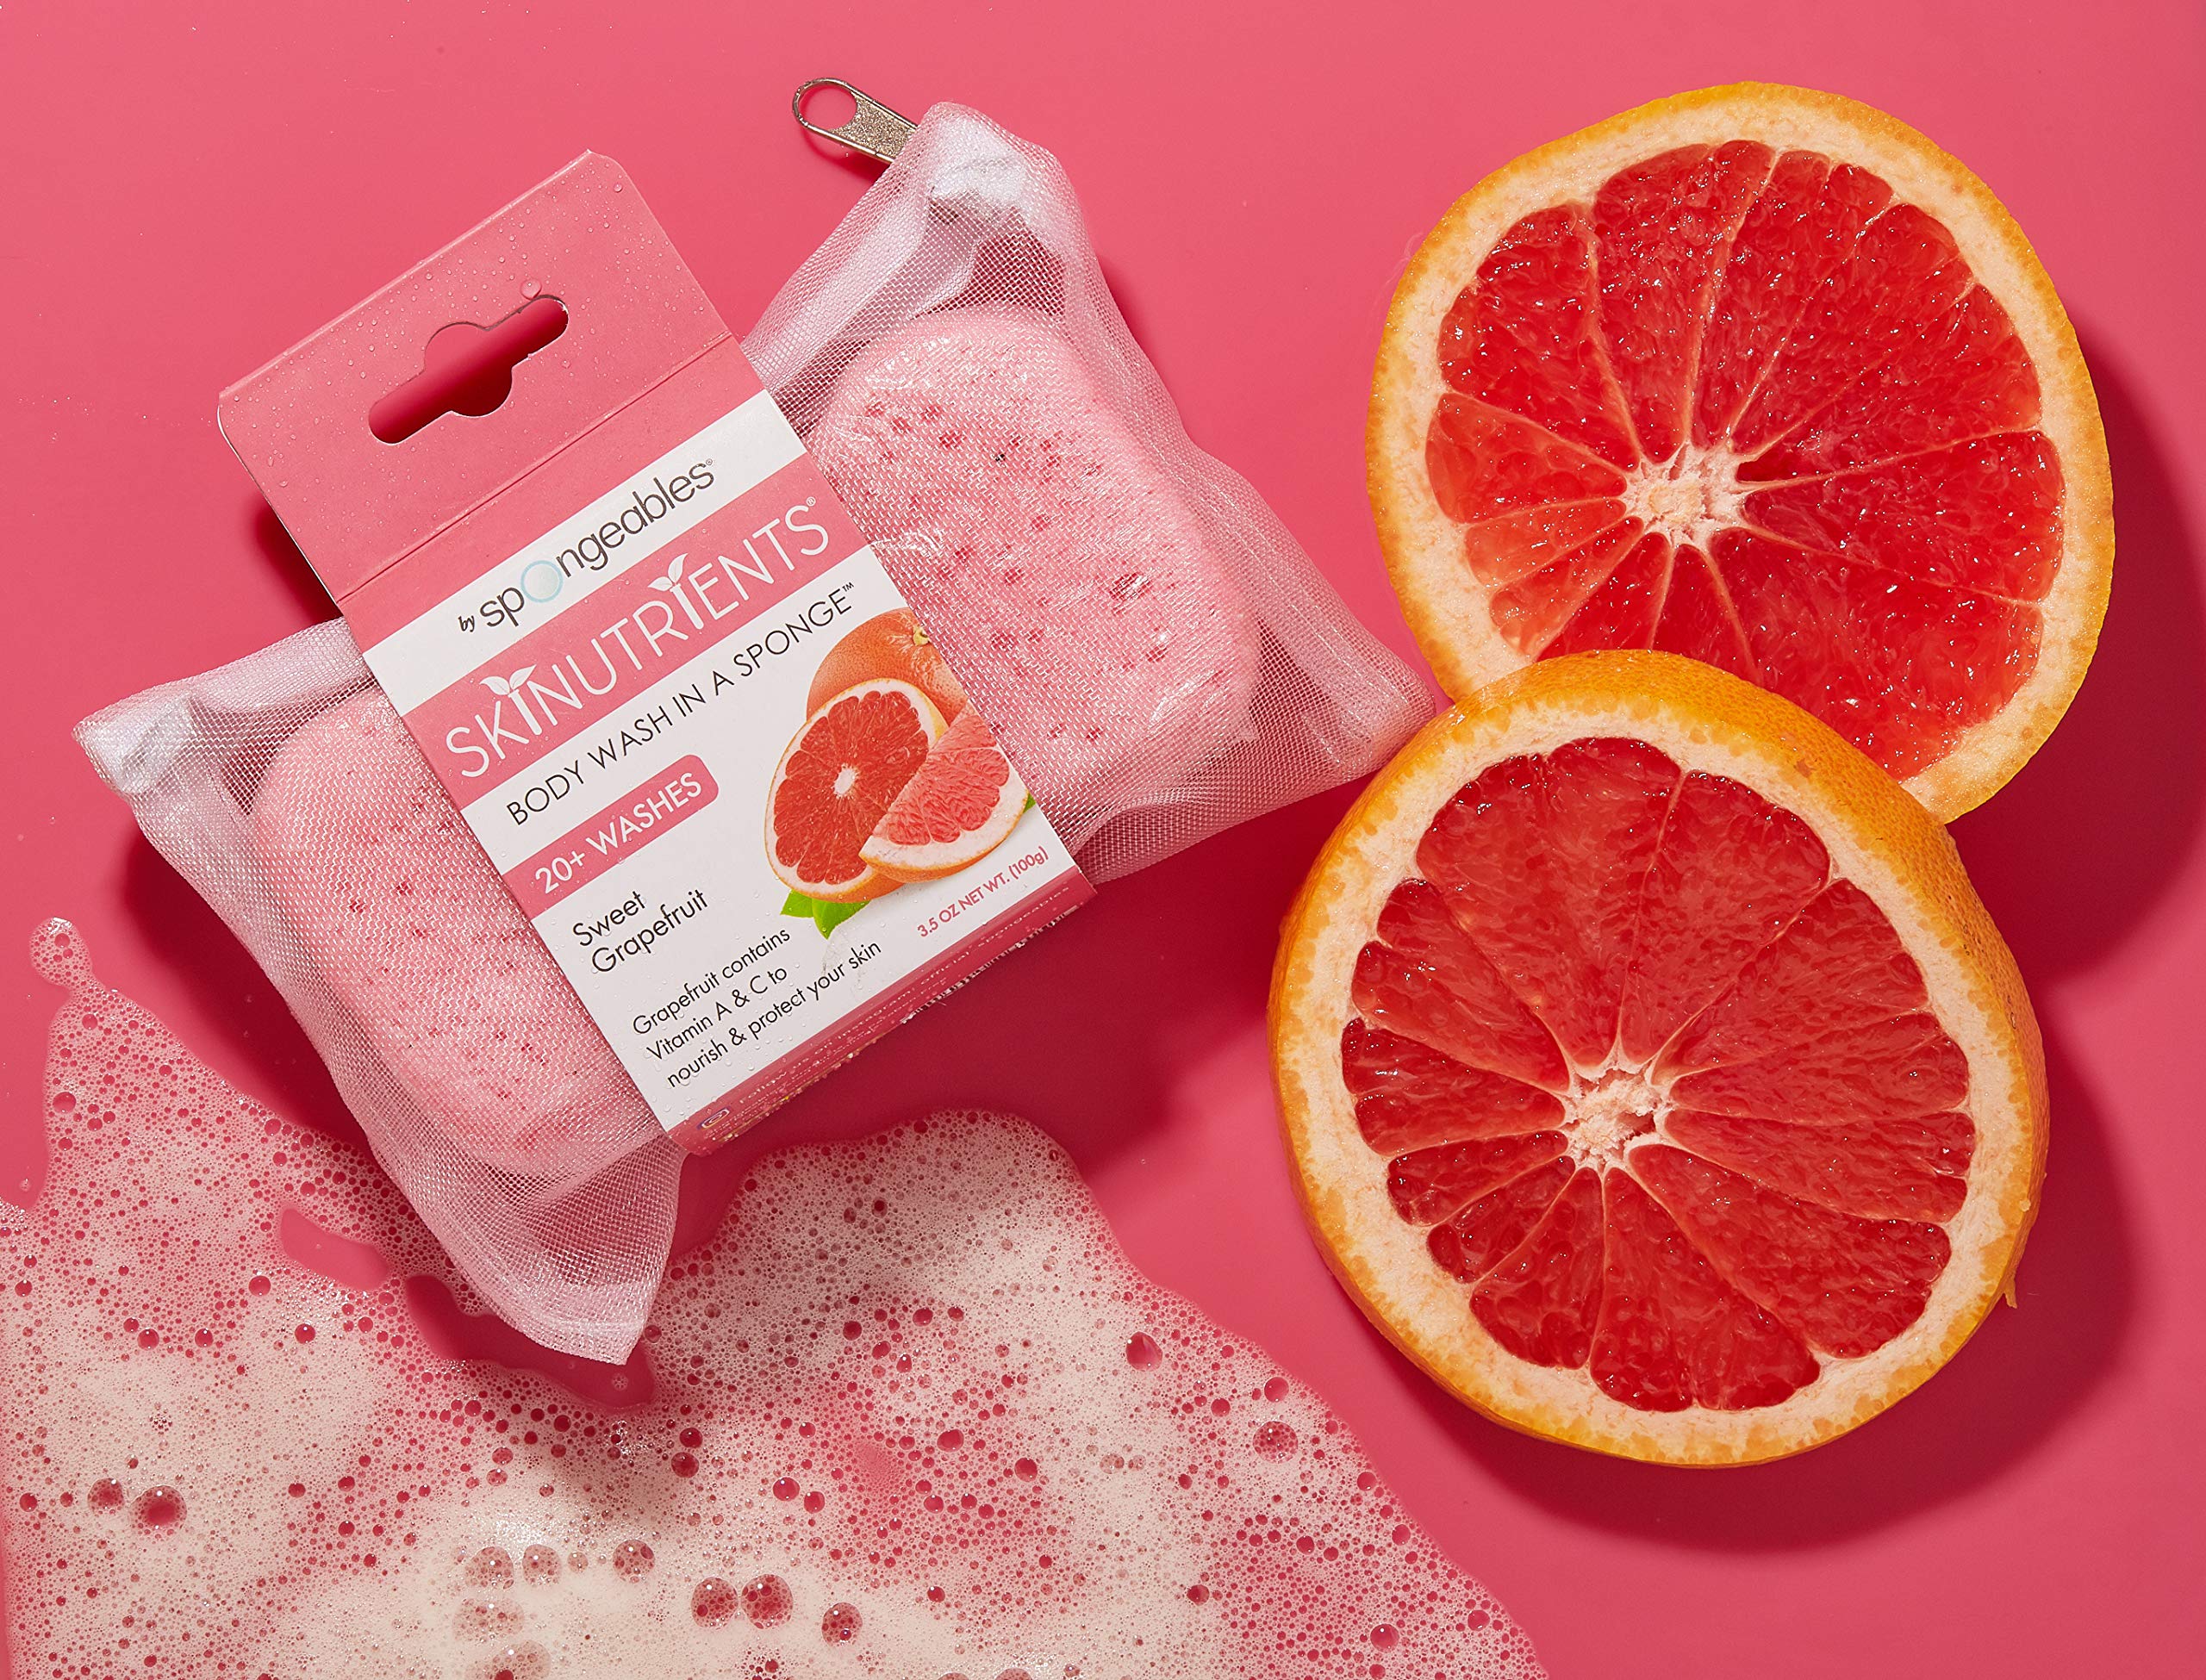 Spongeables Skinutrients Moisturizing Body Wash in a Sponge 20+ Washes Paraben and CrueltyFree Pack , Pink, sweet grapefruit, (Pack of 3)